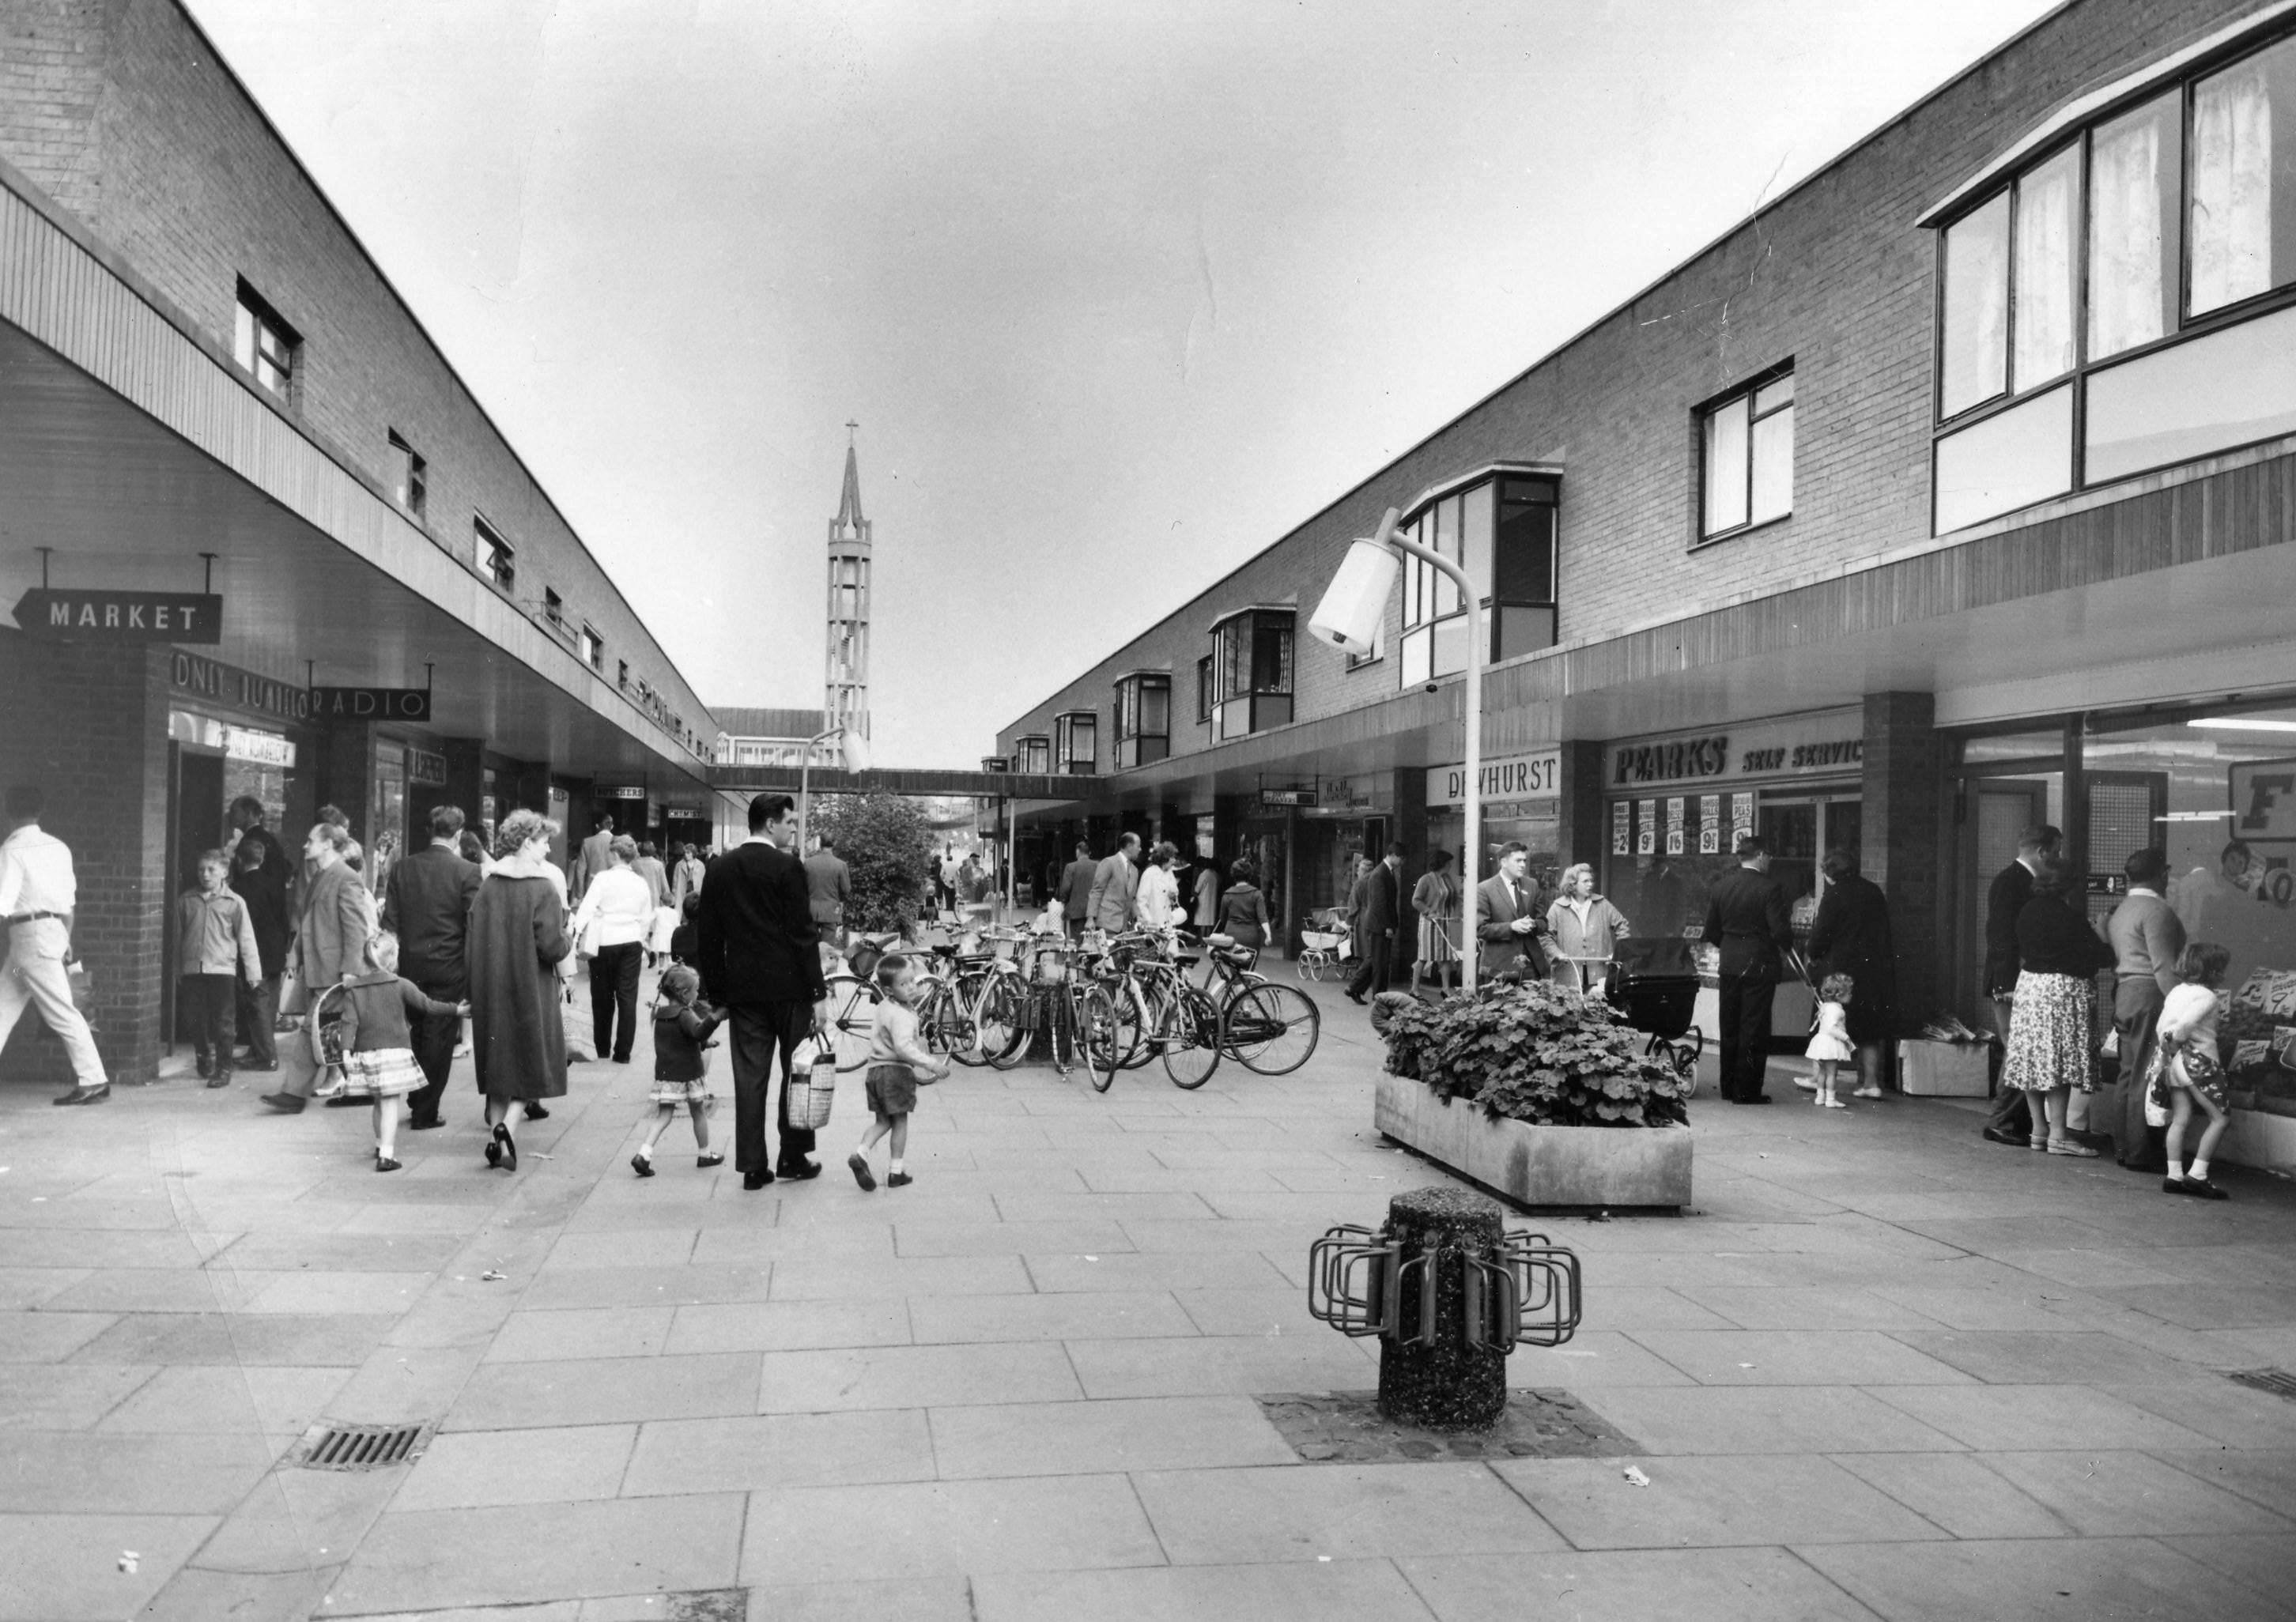 Old photo of people in a pedestrianised shopping street